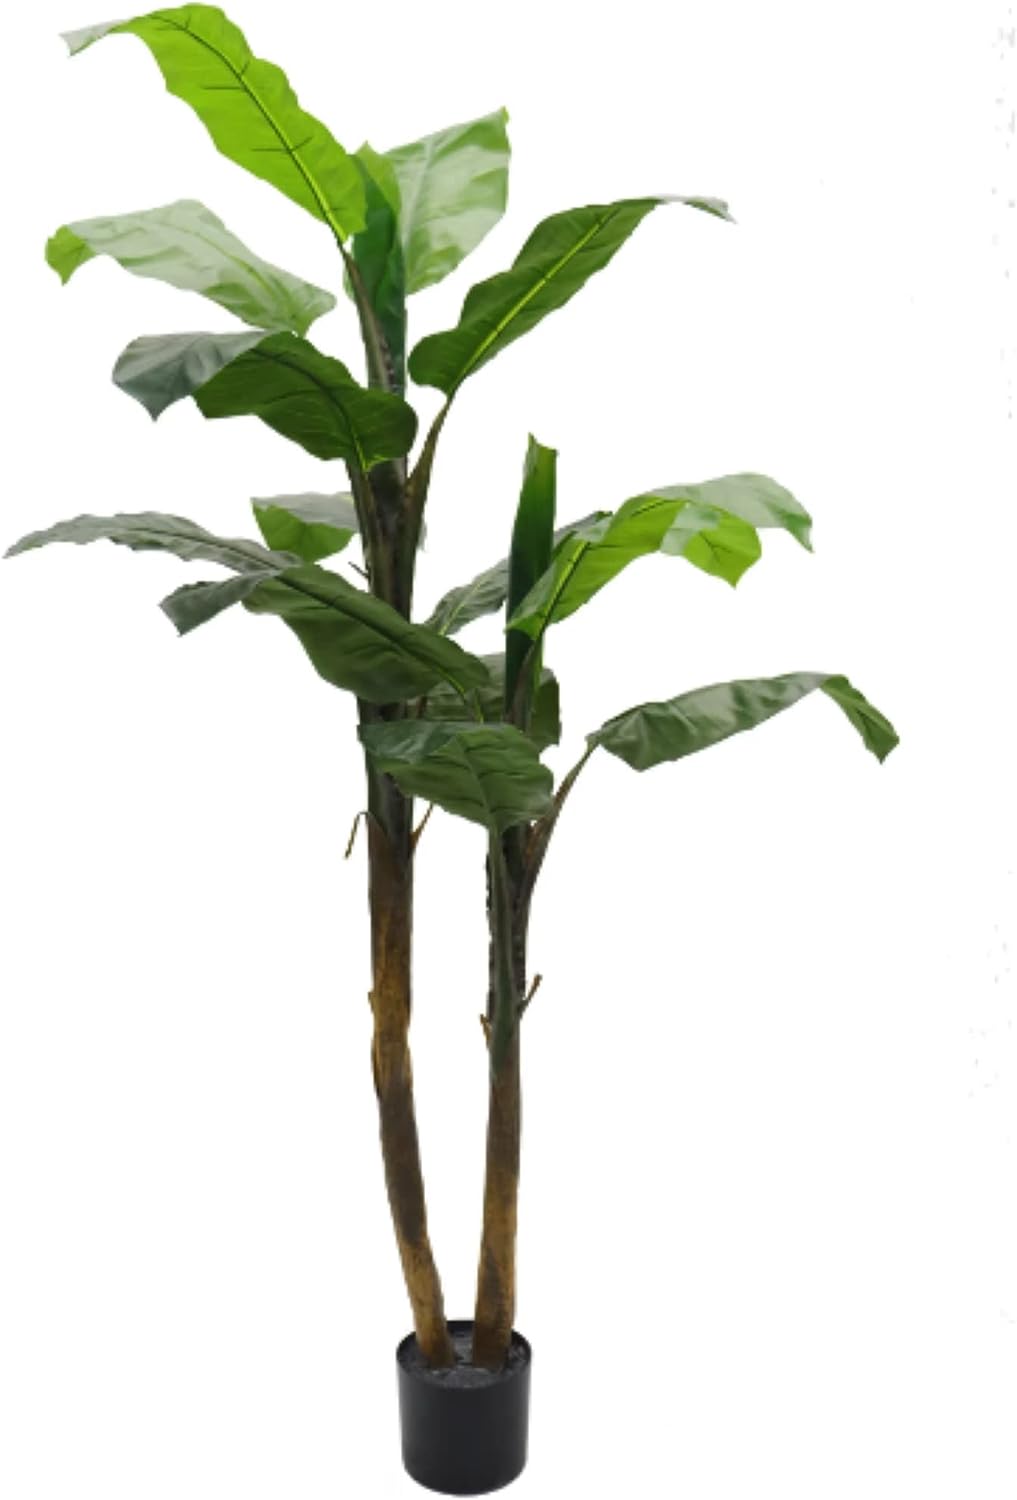 Premium 5' Artificial Banana Tree with 16 Lifelike Leaves - Indoor/Outdoor Home Decor Potted Plant